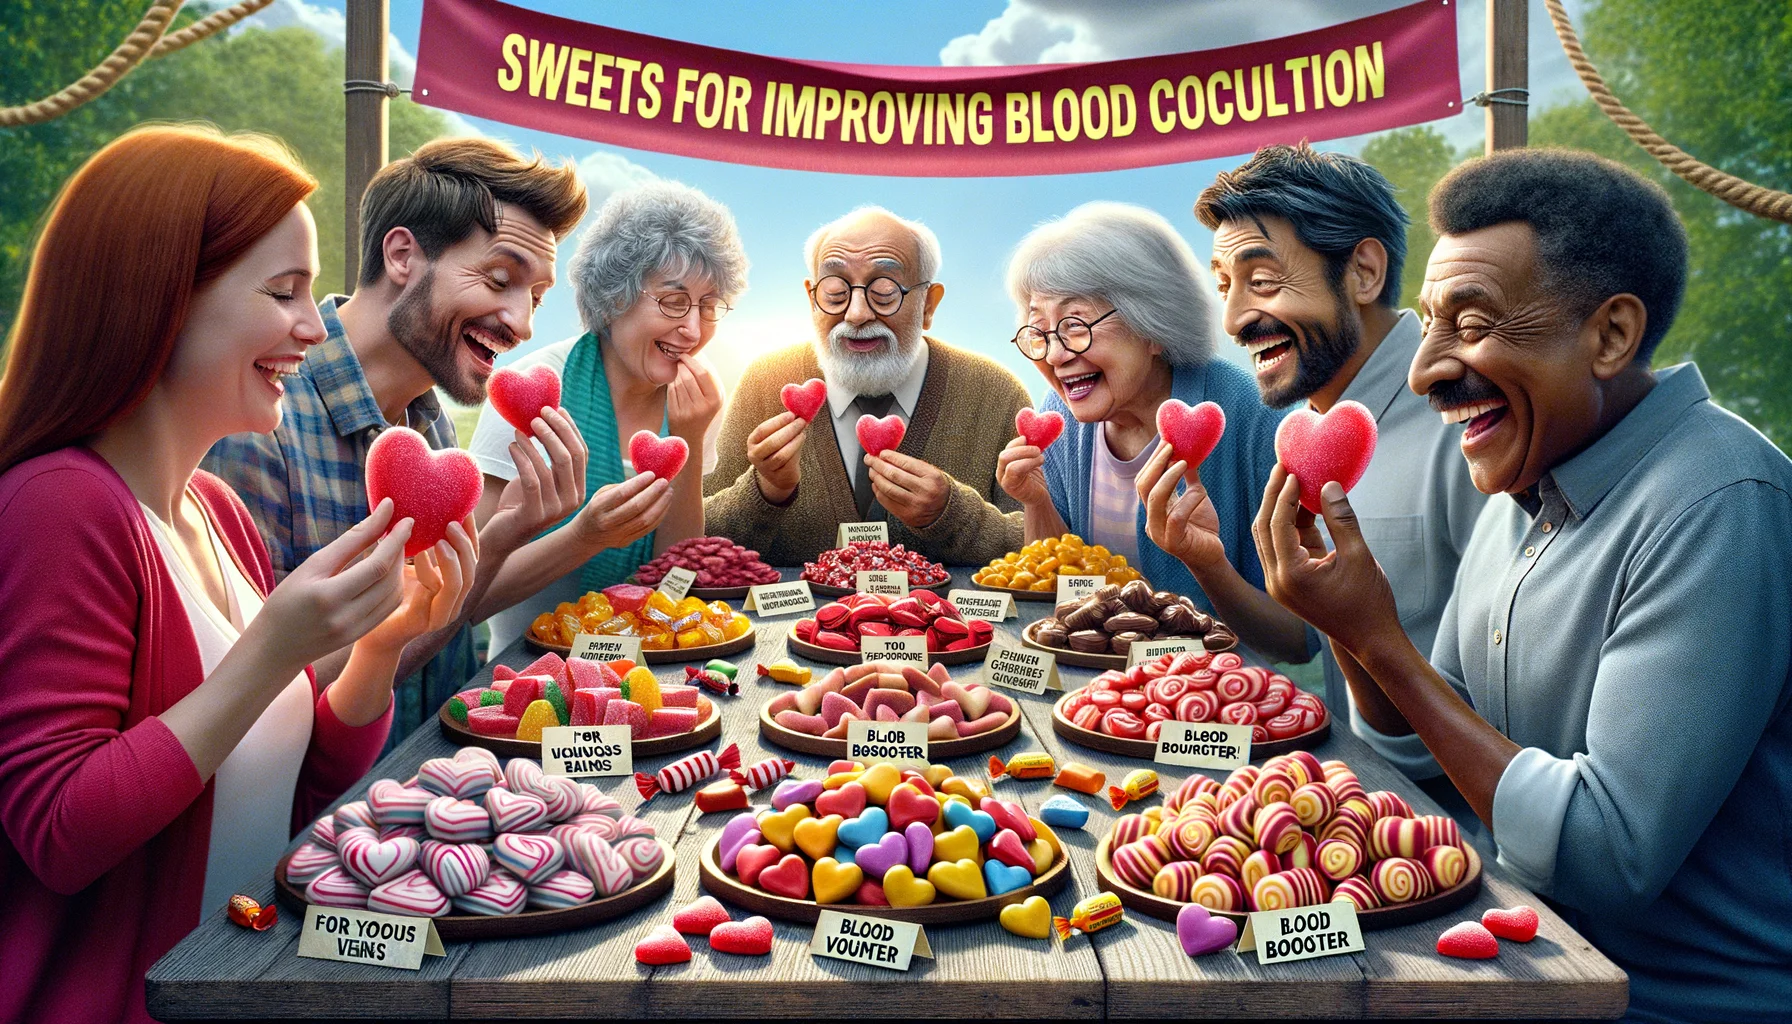 Imagine a humorous yet lifelike scene displaying a variety of colorful, delicious heart-shaped sweets arranged in an inviting spread on a wooden table, each tagged with playful labels saying 'For Joyous Veins', 'Blood Booster', and 'Circulation Candies'. All around the table, people of different descents - a Caucasian woman, a Hispanic man, a South Asian child, and a Middle-Eastern elderly man are gleefully holding, examining or eating these sweets with eager expressions and laughing. Additionally, there's a banner overhead playfully stating 'Sweets for Improving Blood Circulation' against a sunny outdoor background.